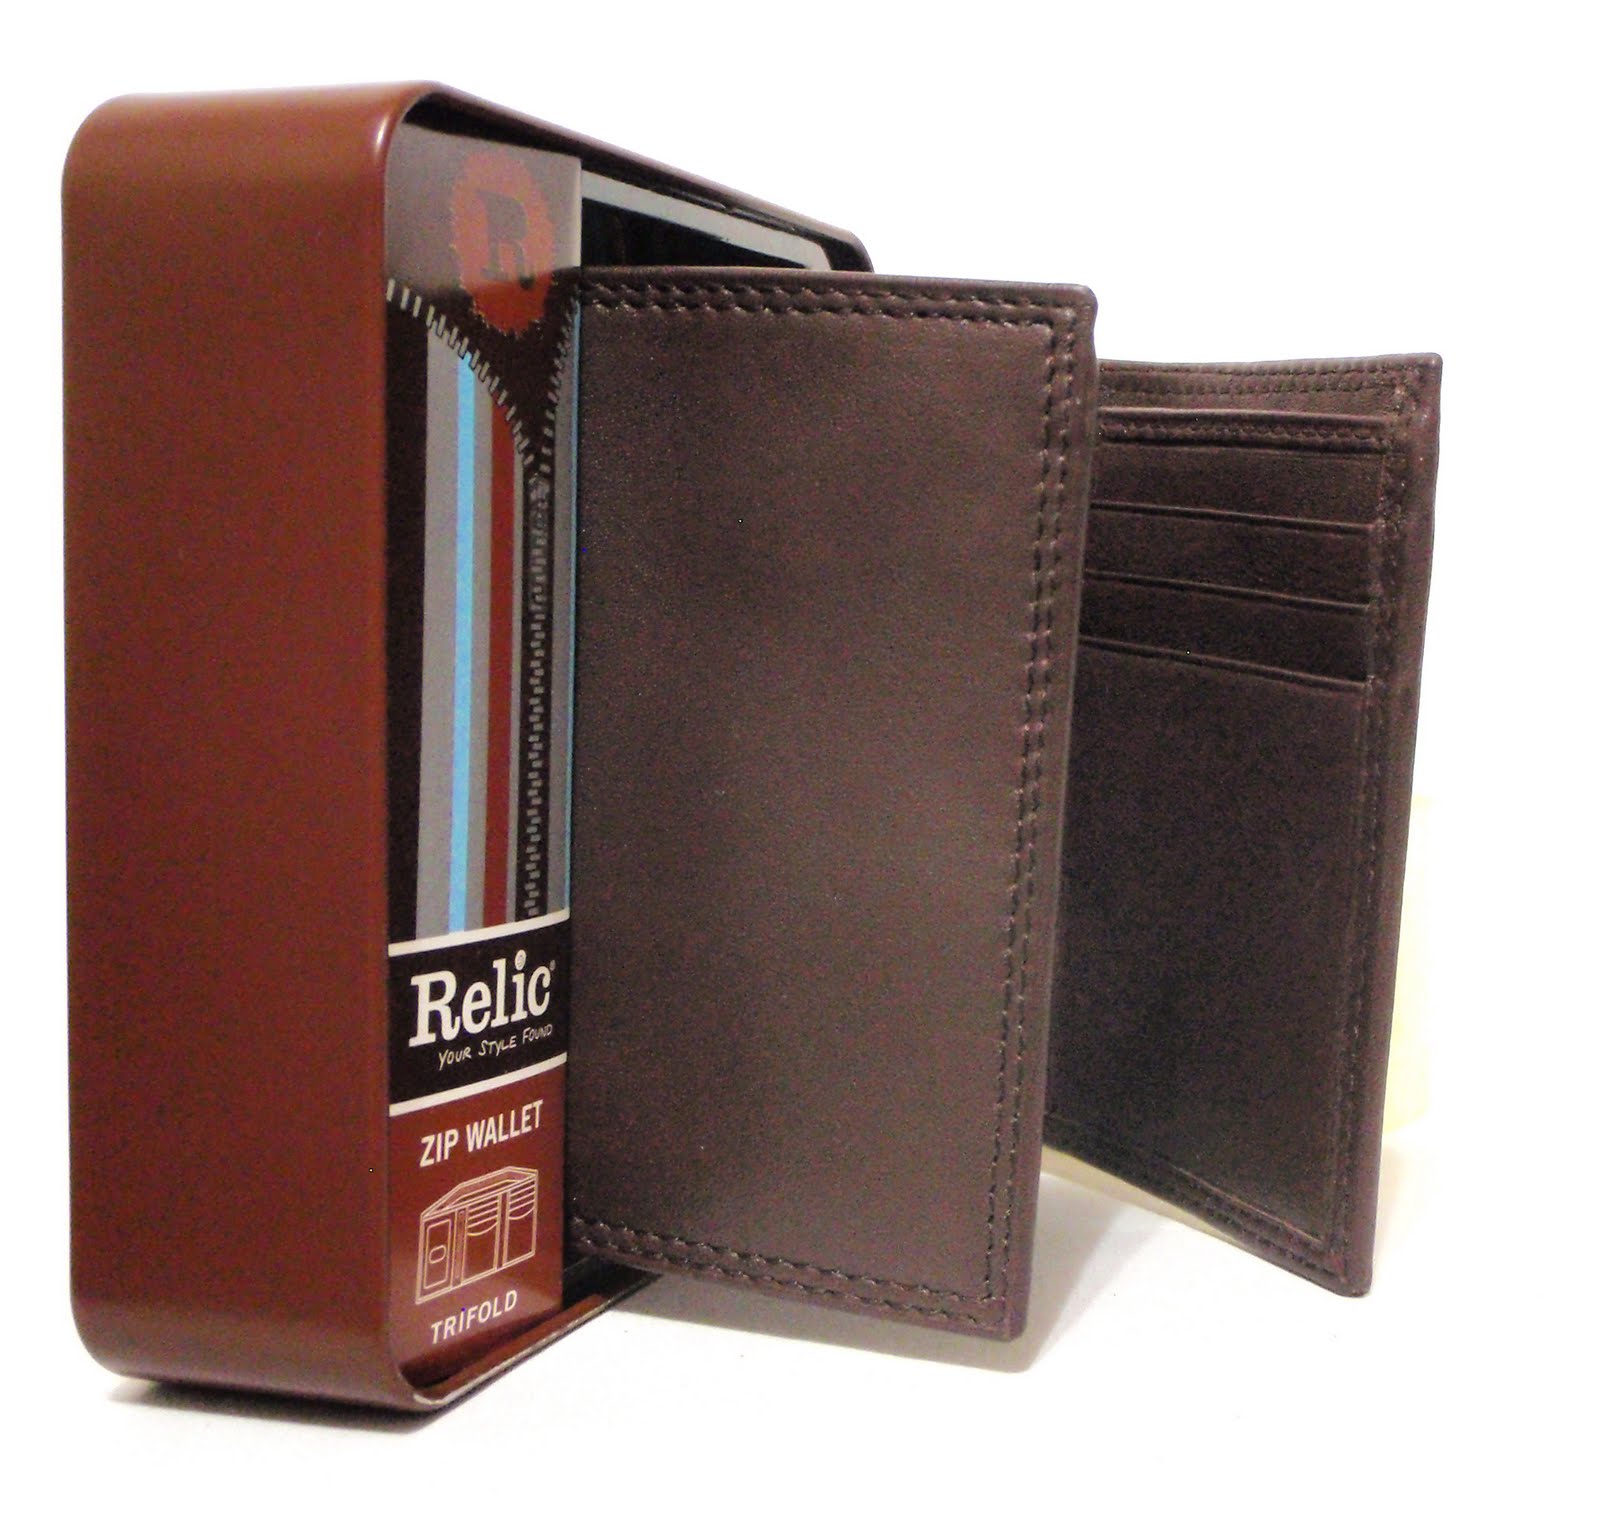 Boutique Malaysia: RELIC BY FOSSIL MENS WALLET